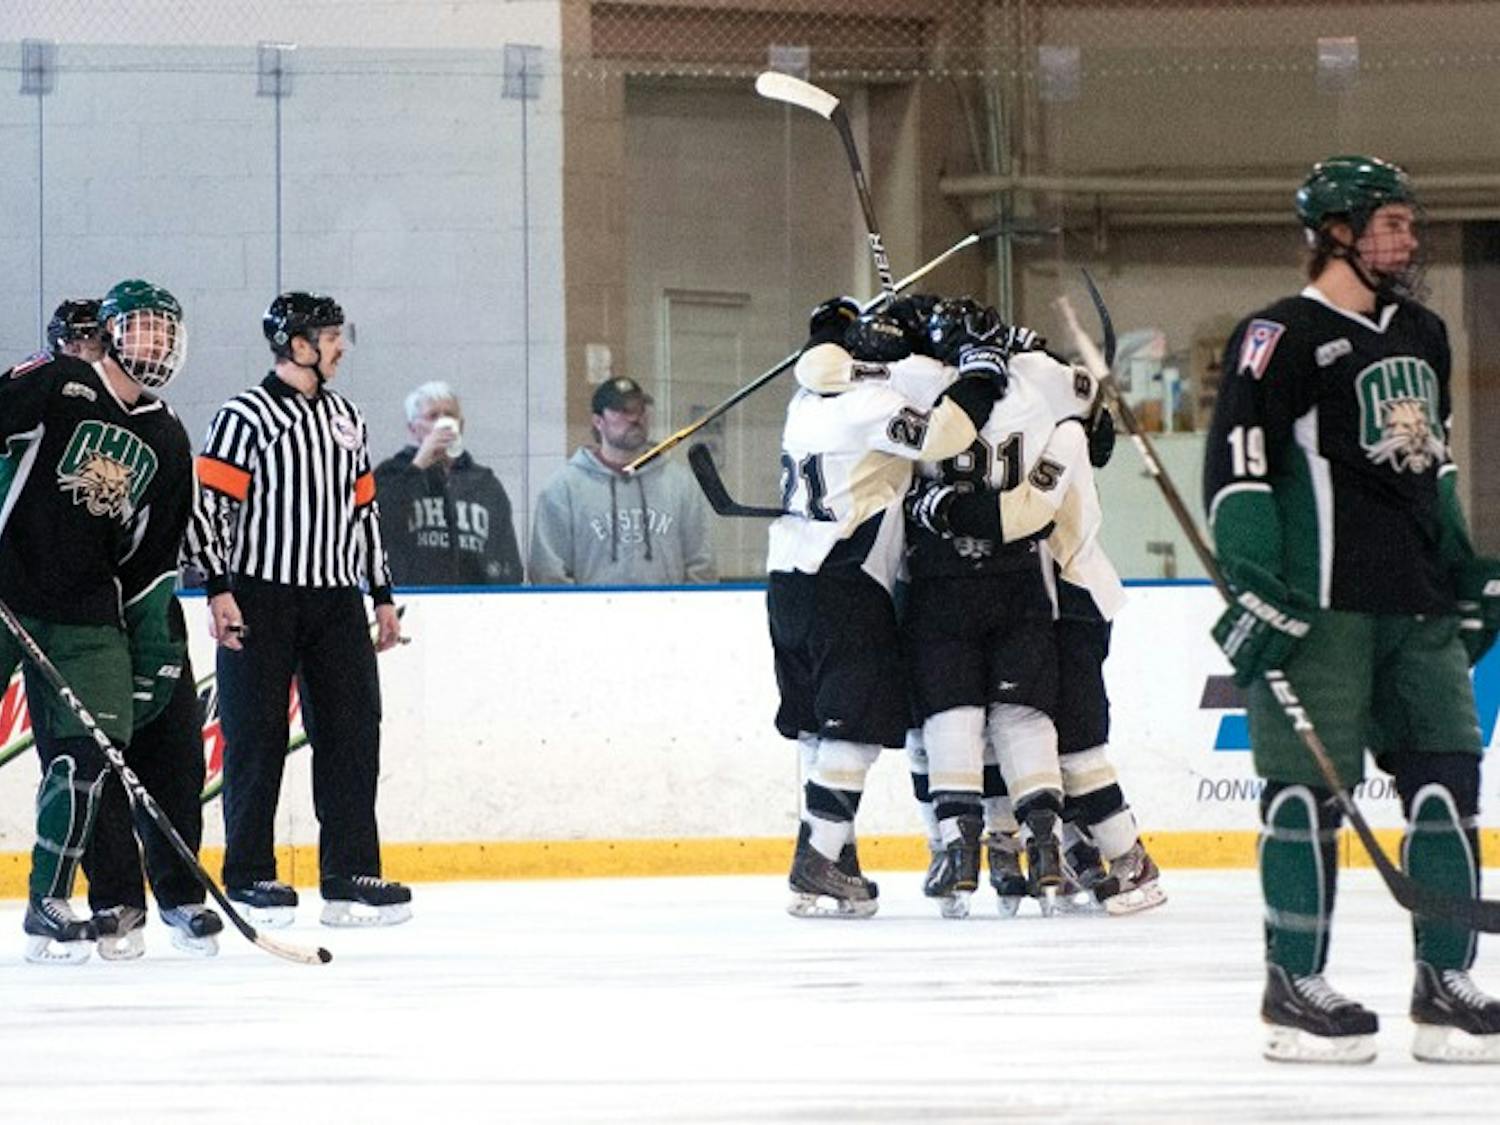 Hockey: Mental lapses, fatigue contribute to Bobcat defeat in CSCHL title game  